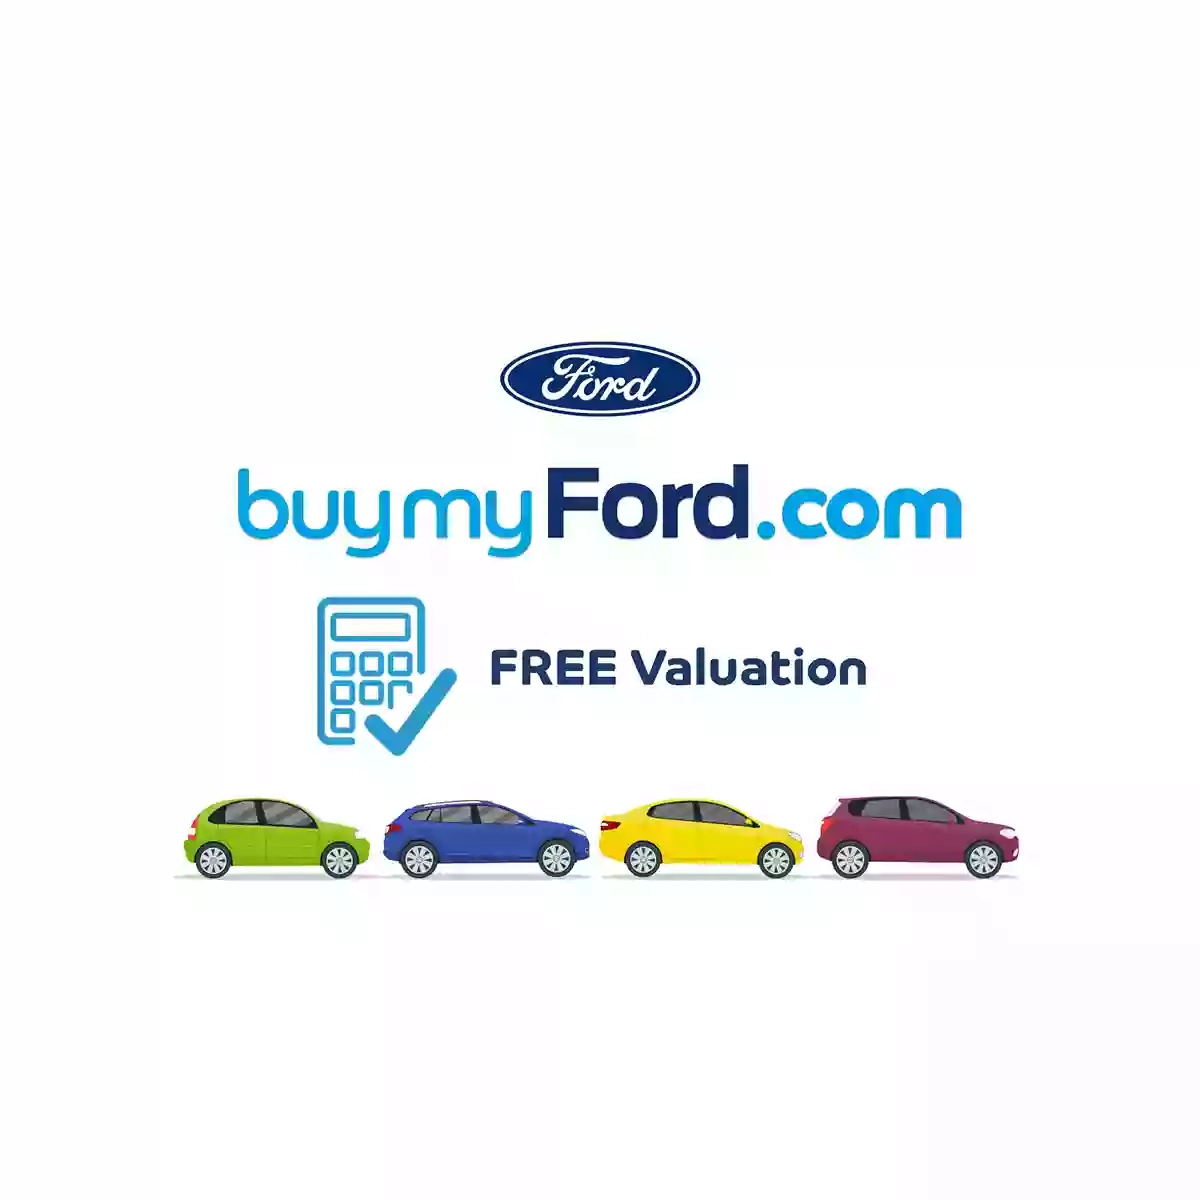 buy my ford